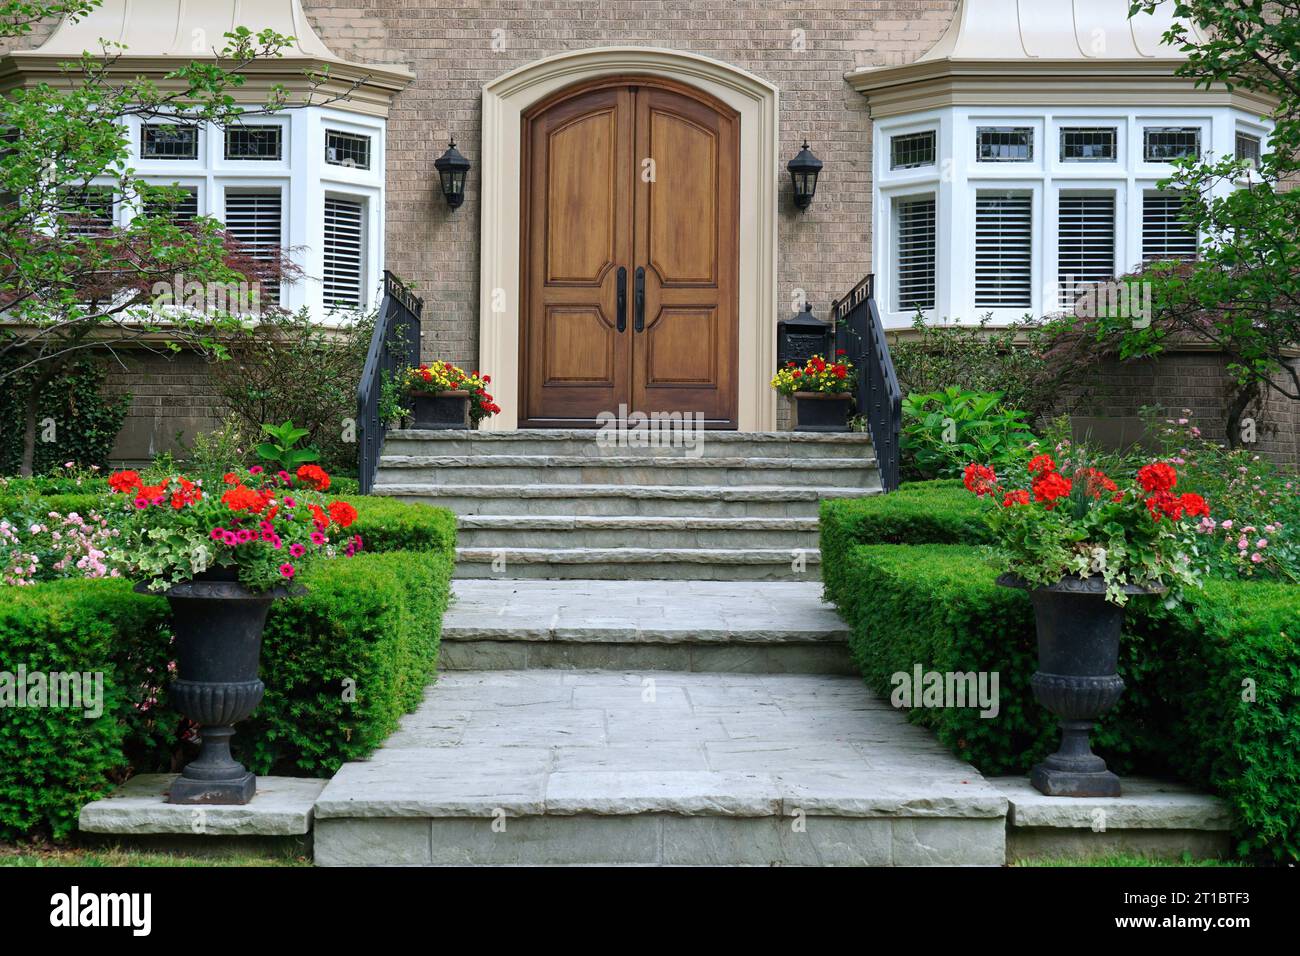 Flagstone steps leading to elegant wood grain double front door of house Stock Photo